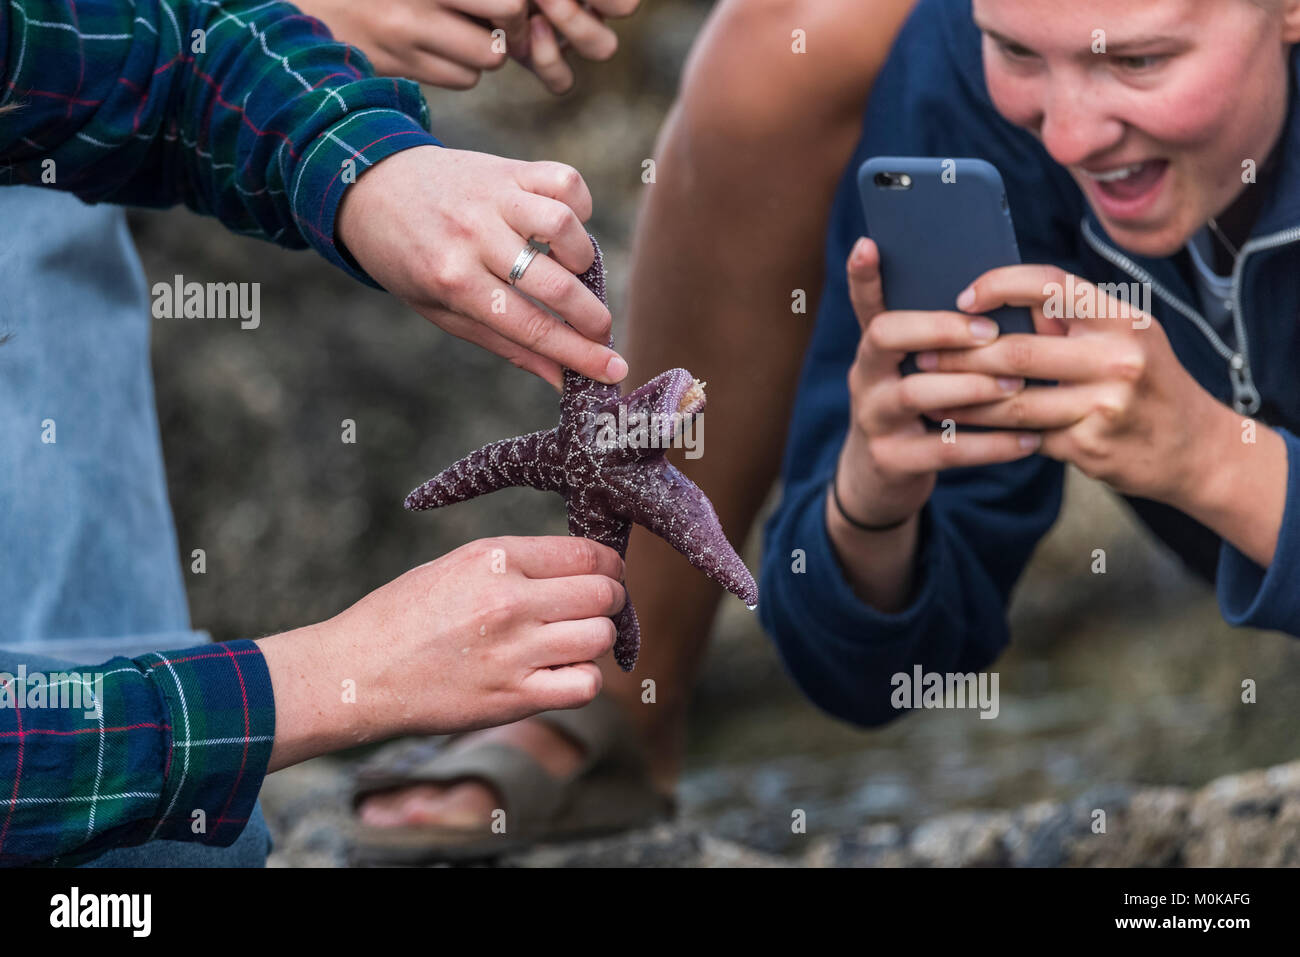 A family looks excitedly at a starfish while someone takes a picture of the underside; Tofino, British Columbia, Canada Stock Photo